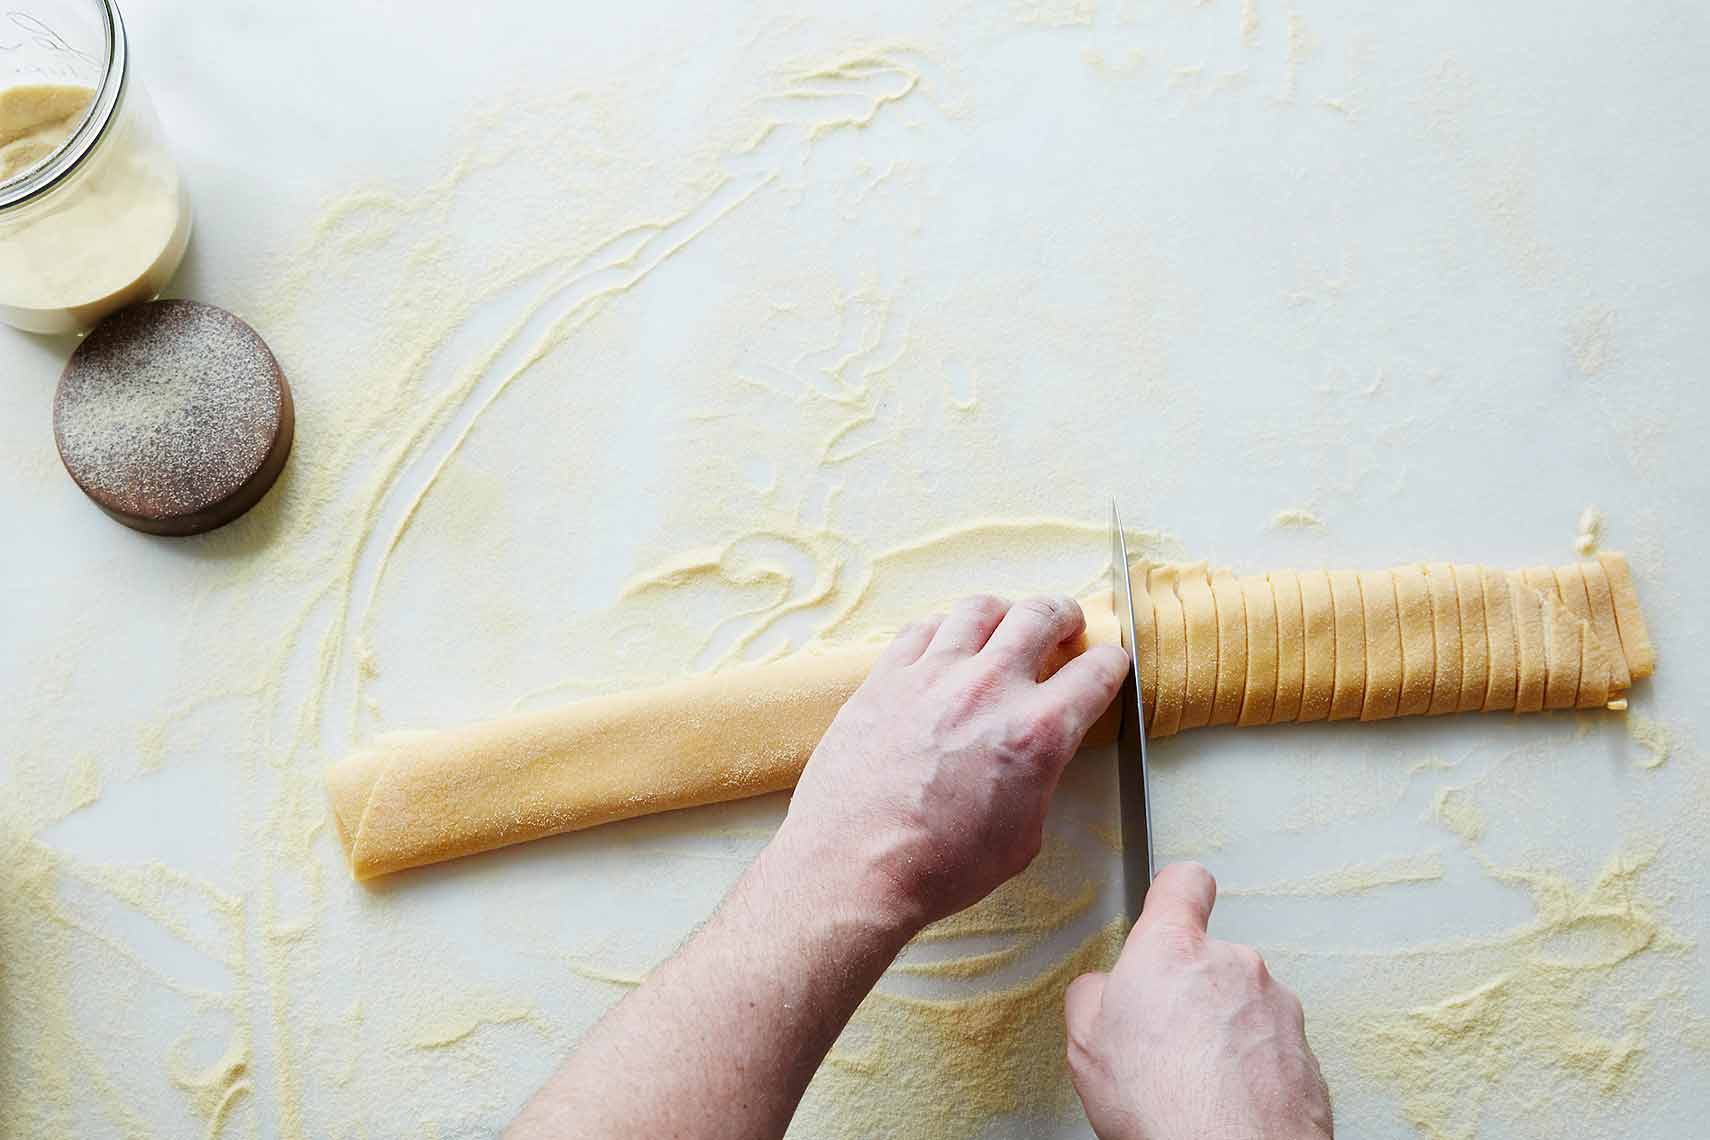 how to make pasta without a recipe